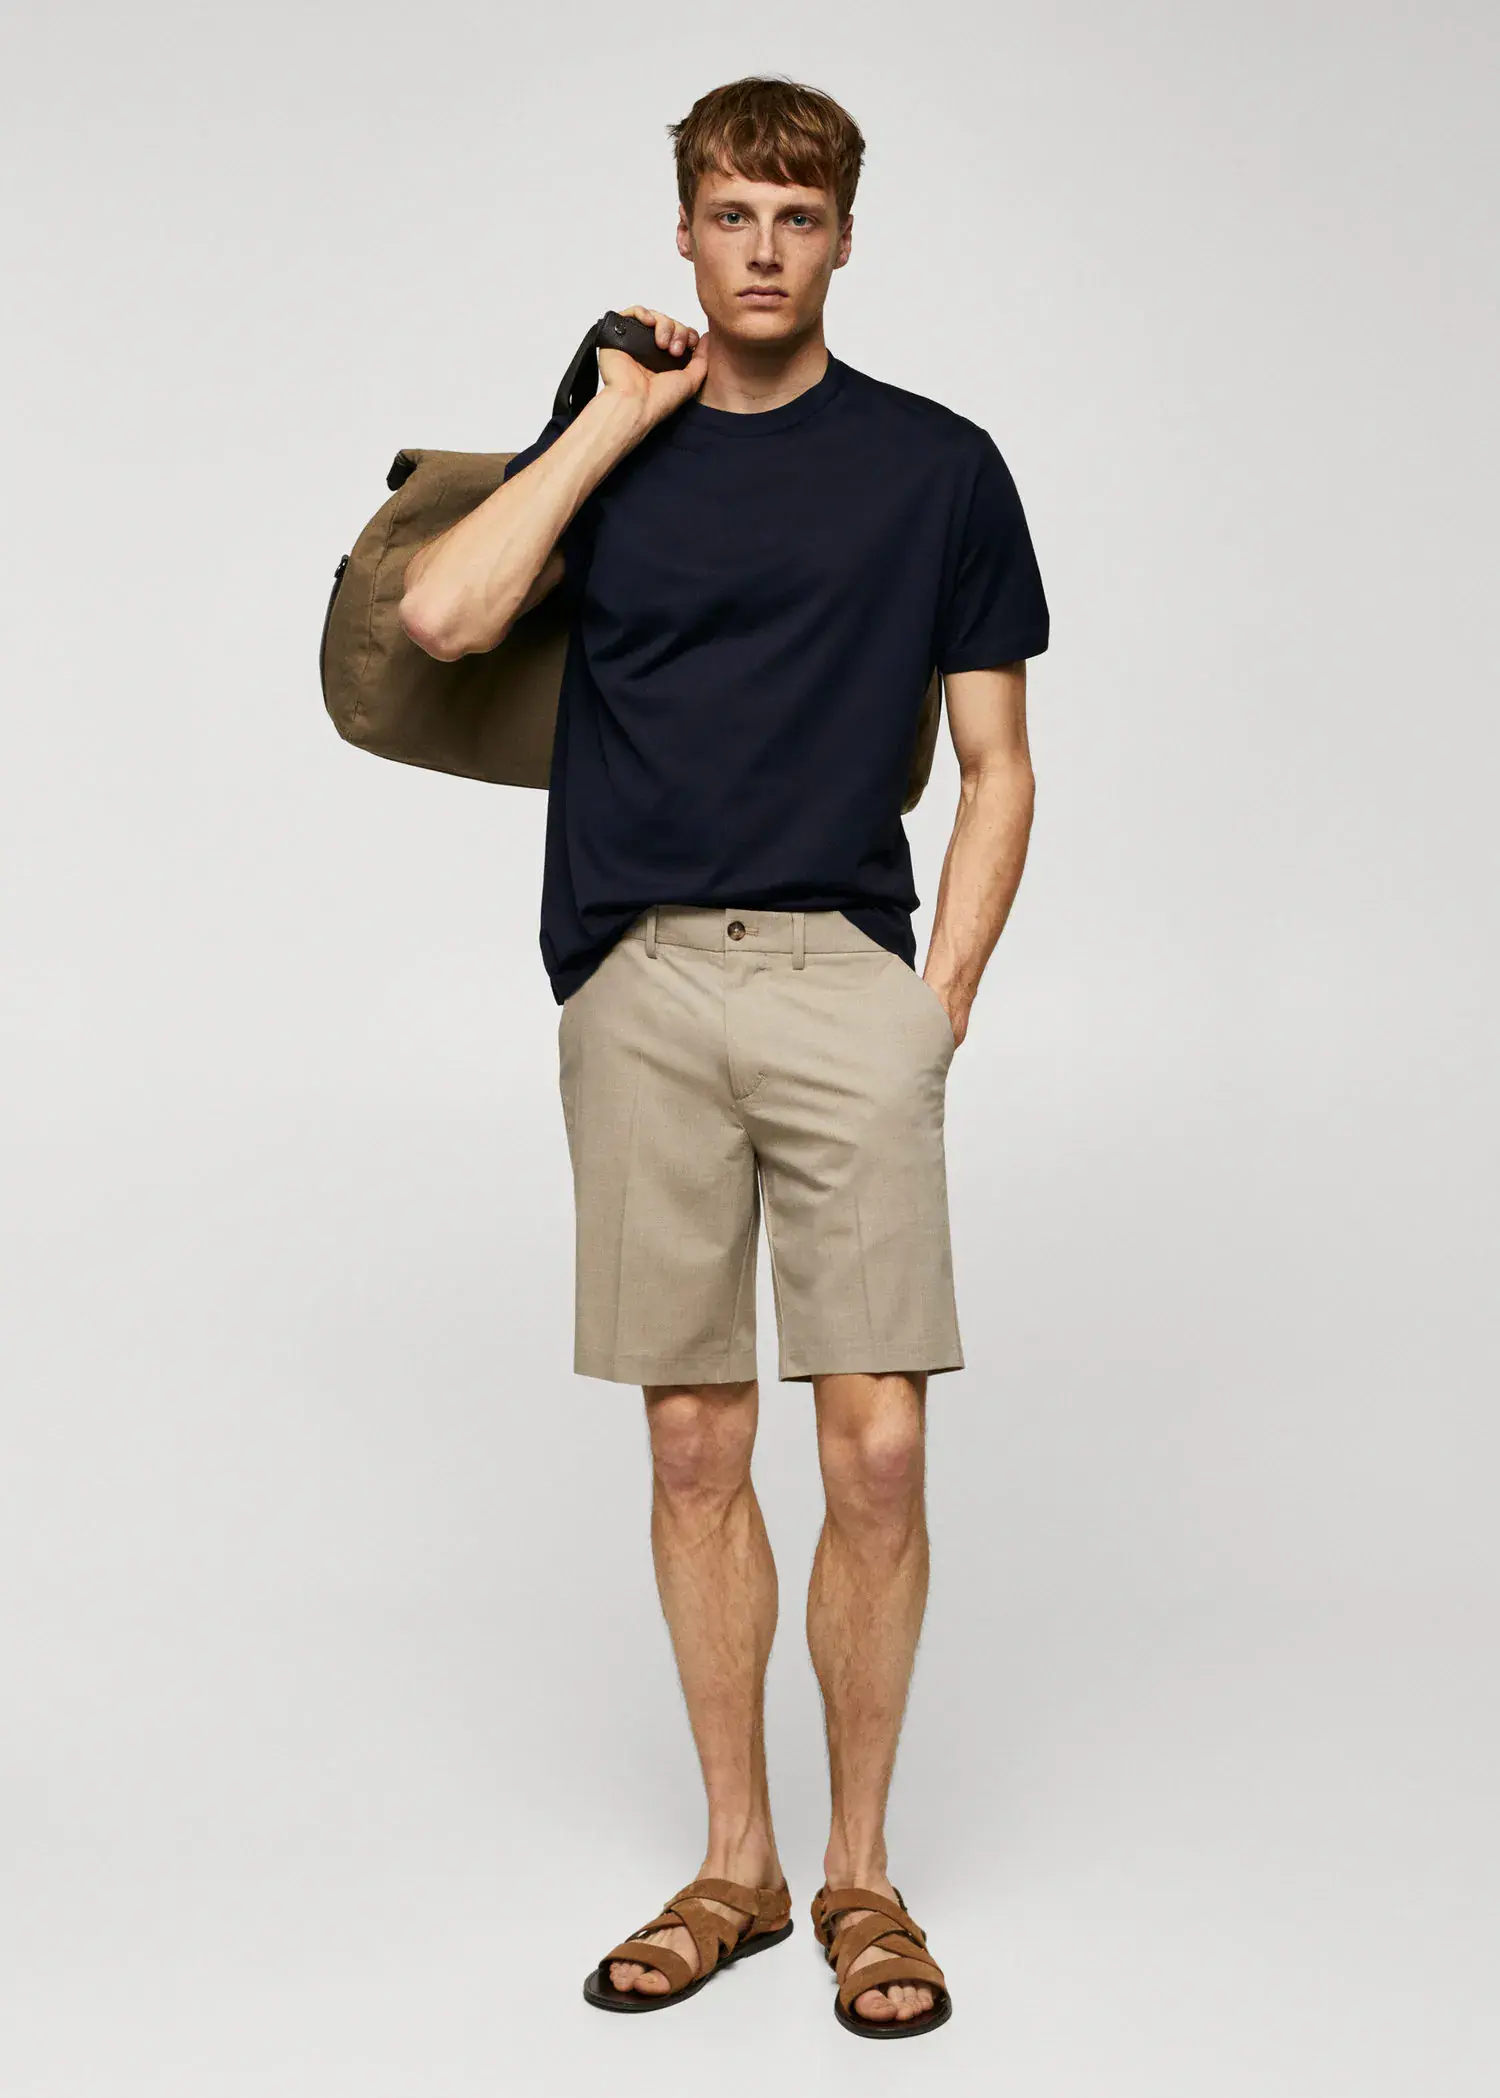 Mango Mercerised regular-fit t-shirt. a young man in shorts and a black t-shirt. 